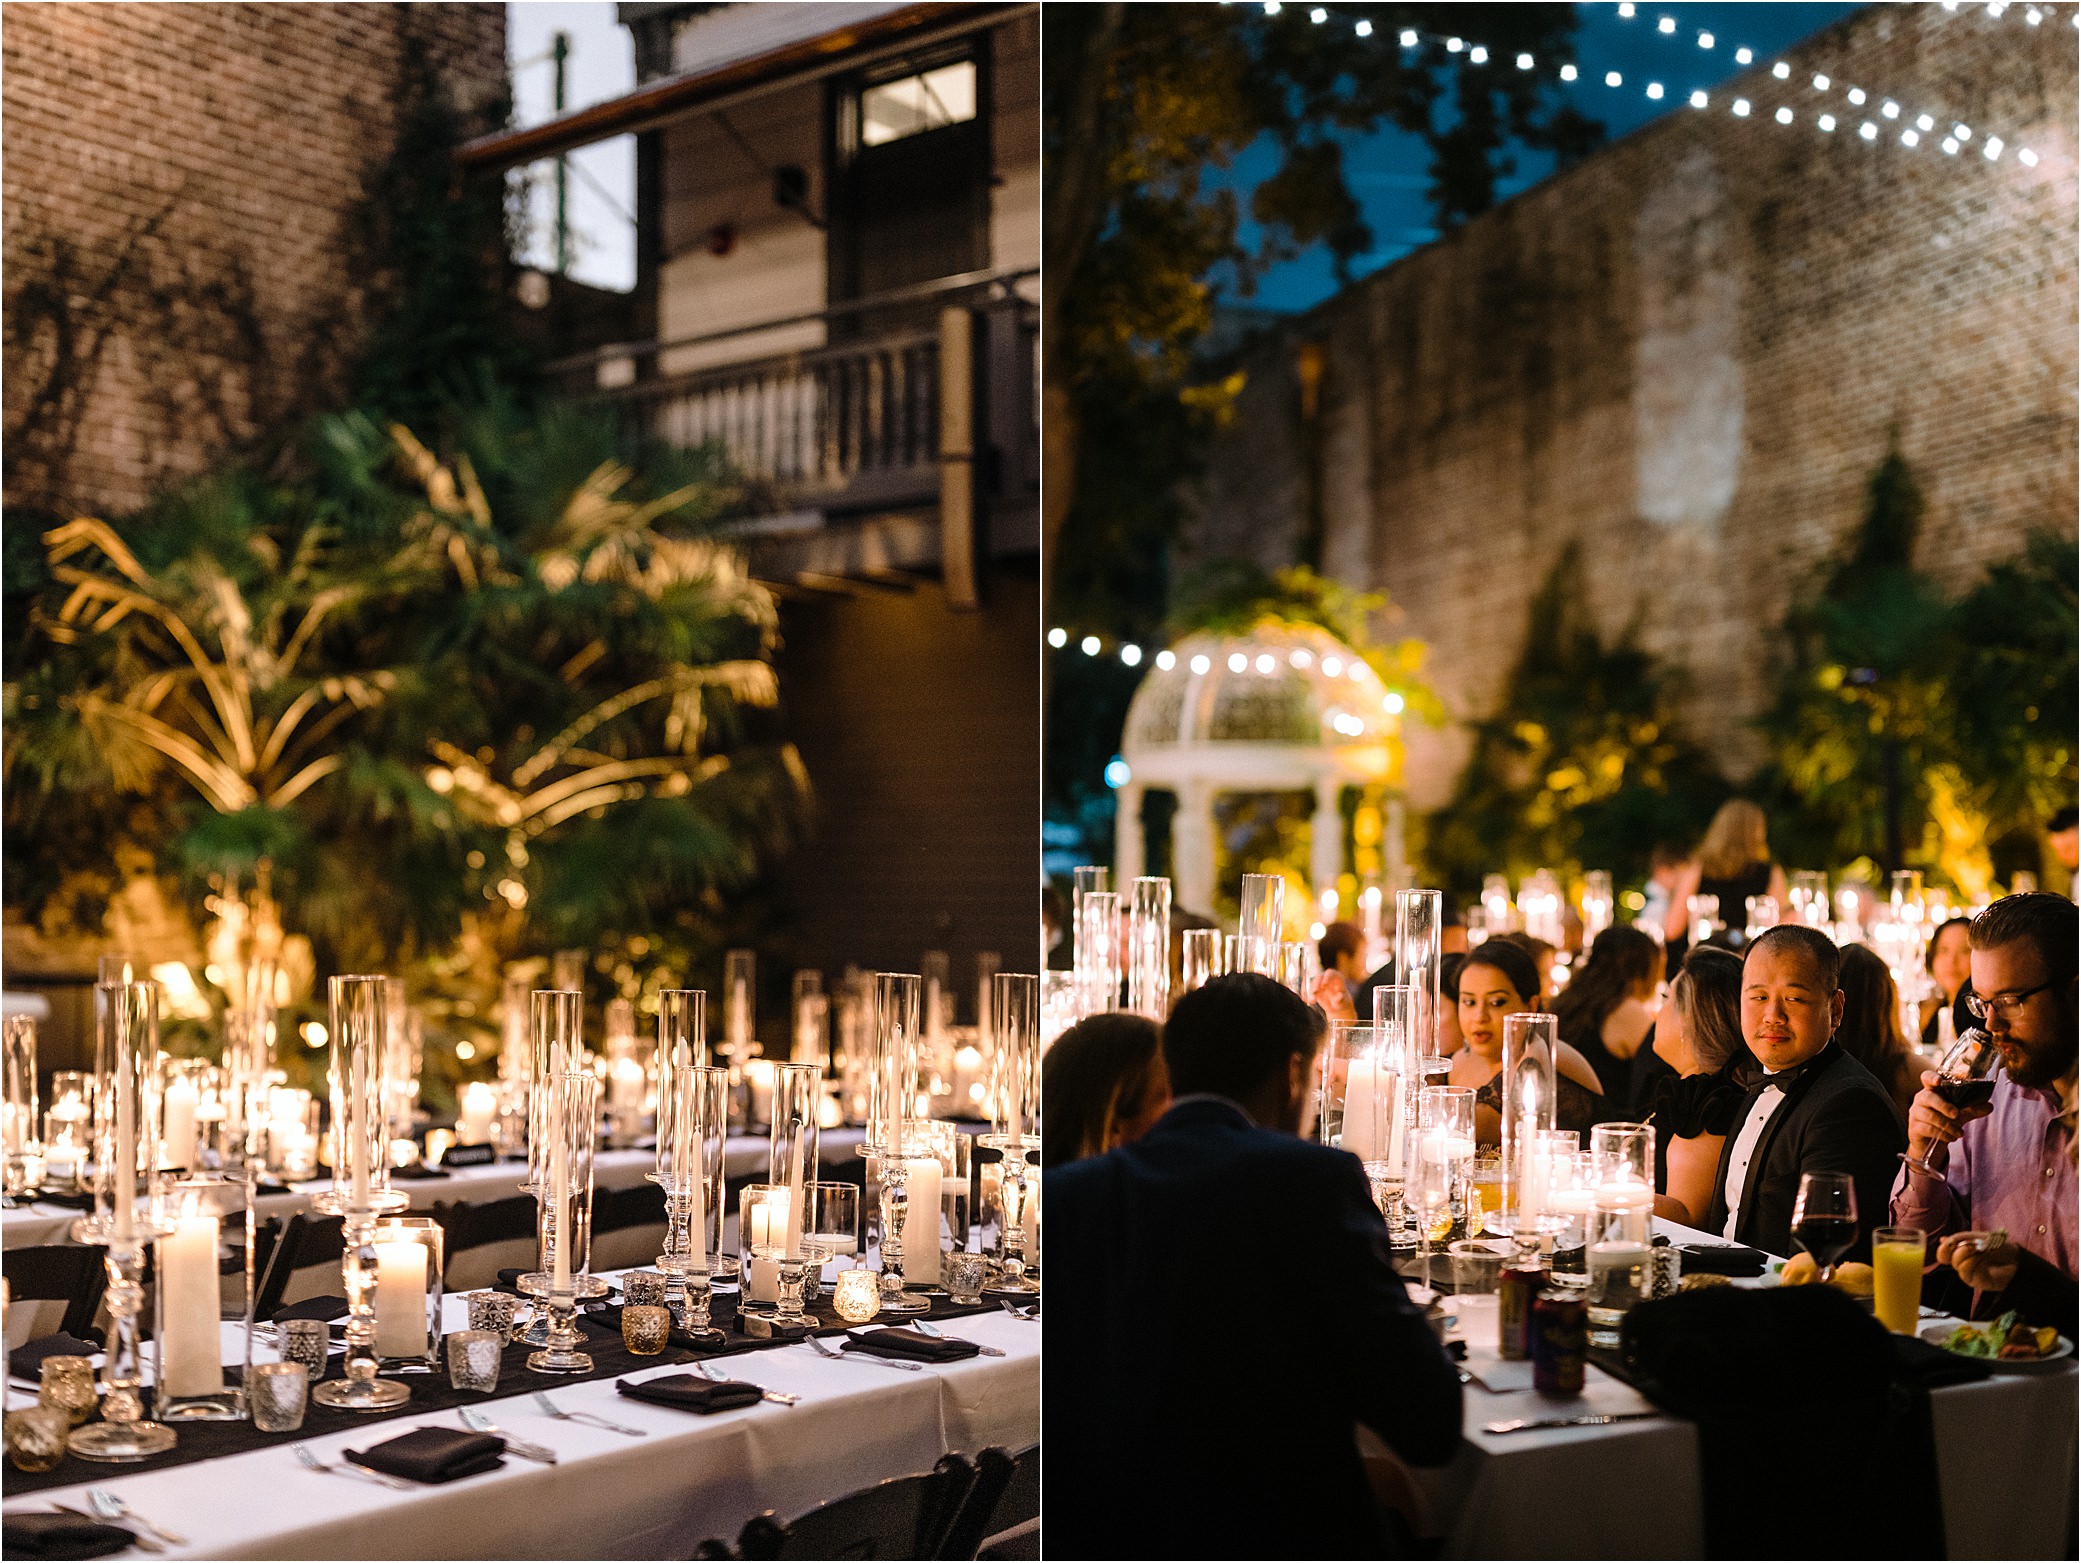 Guests sit at reception tables to eat a meal by candle light. 